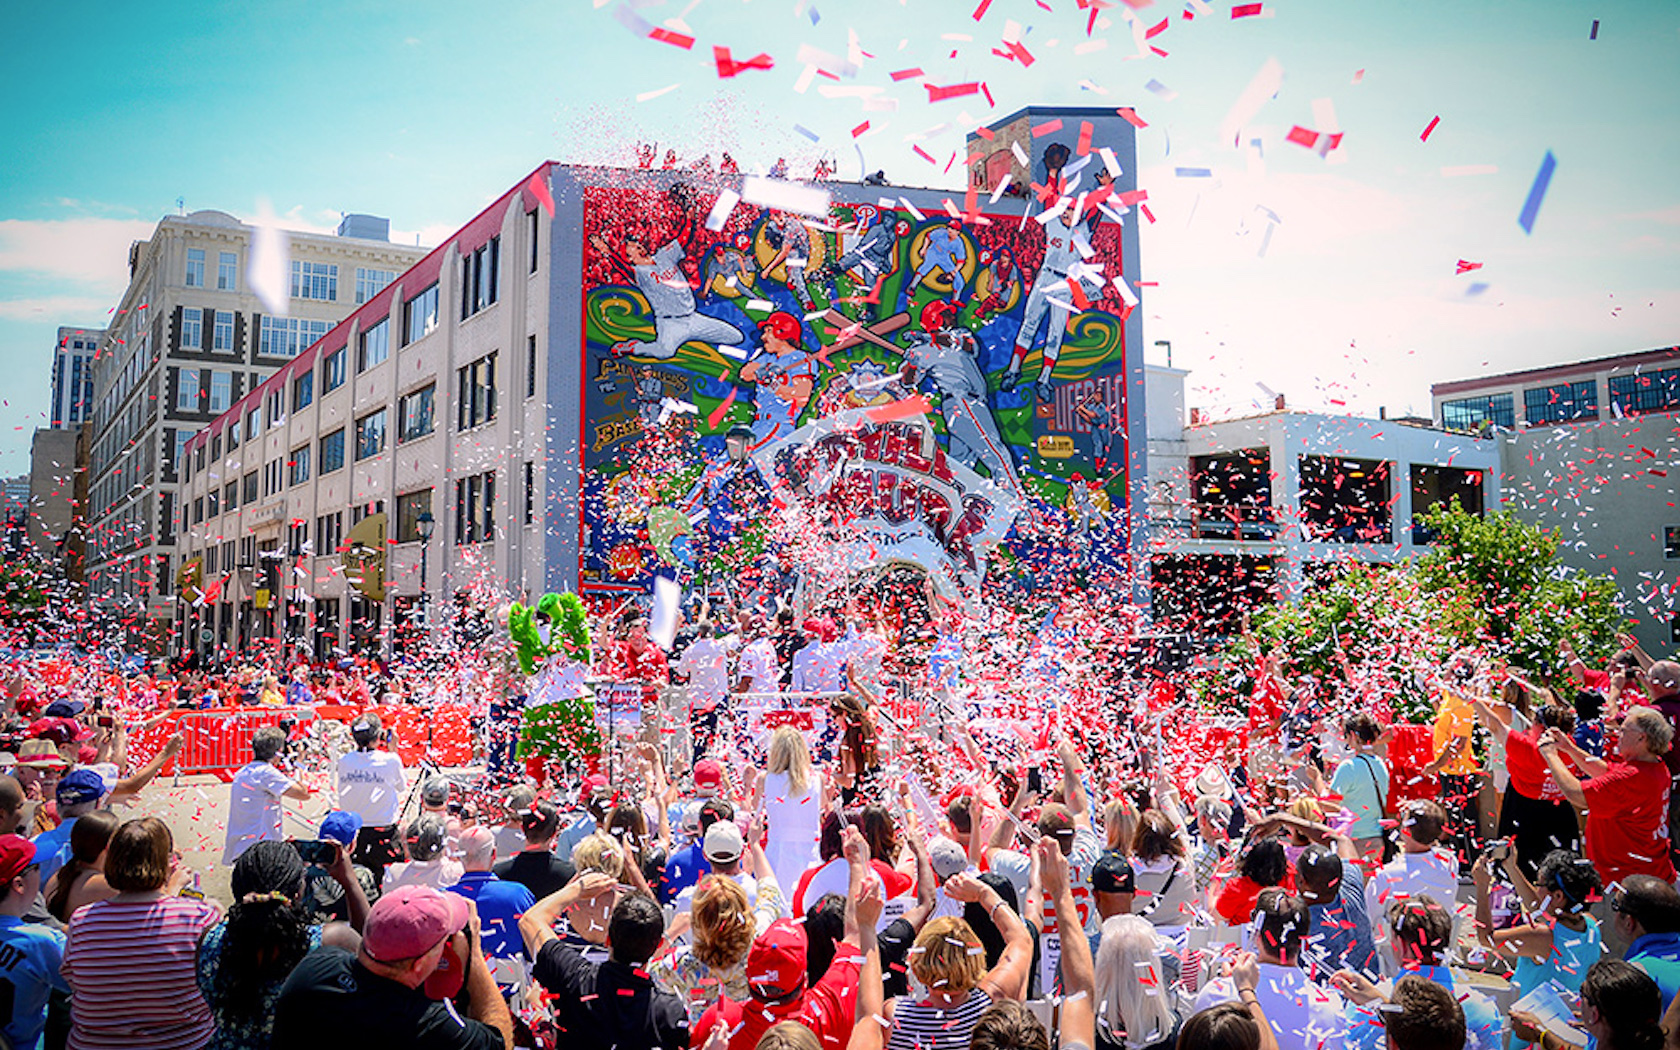 The Phillies Mural Dedication in Philadelphia. Photo by Miles Kennedy